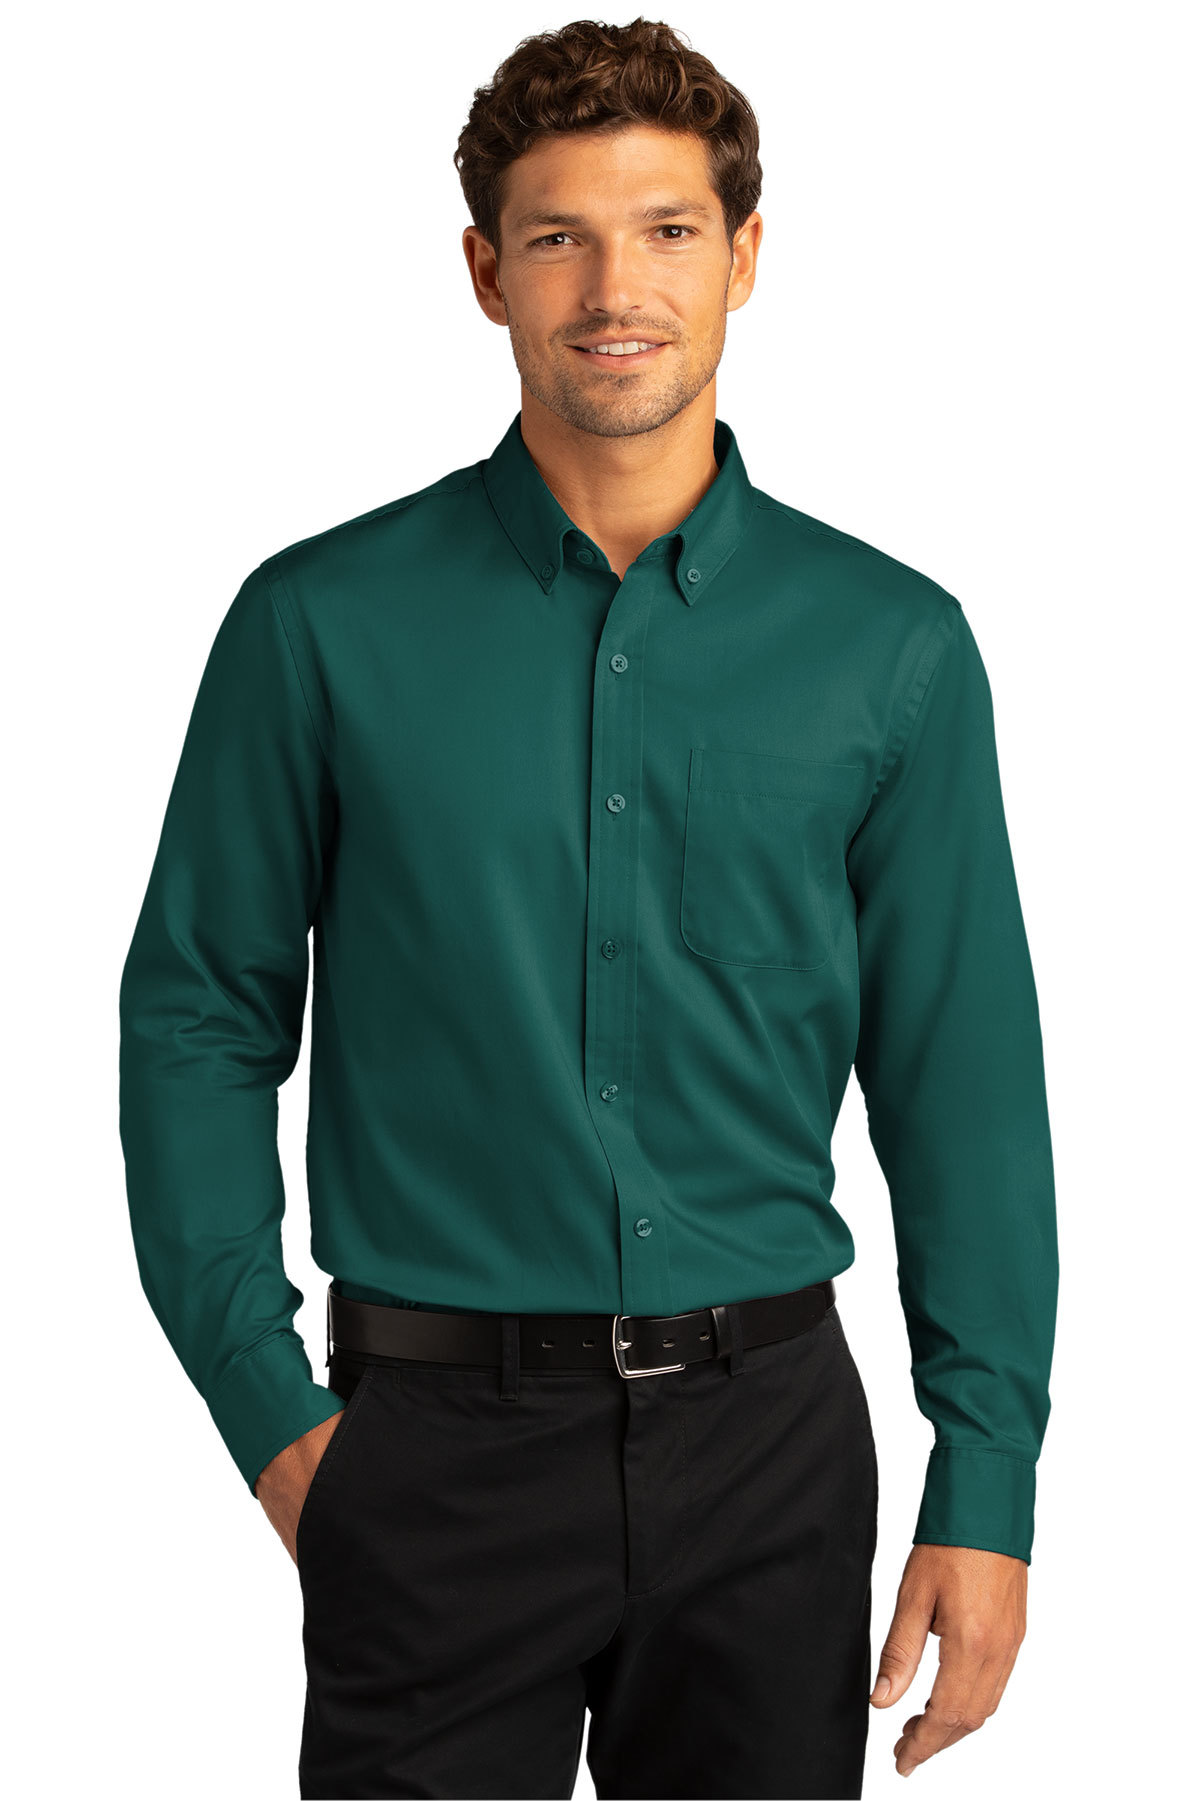 click to view Marine Green